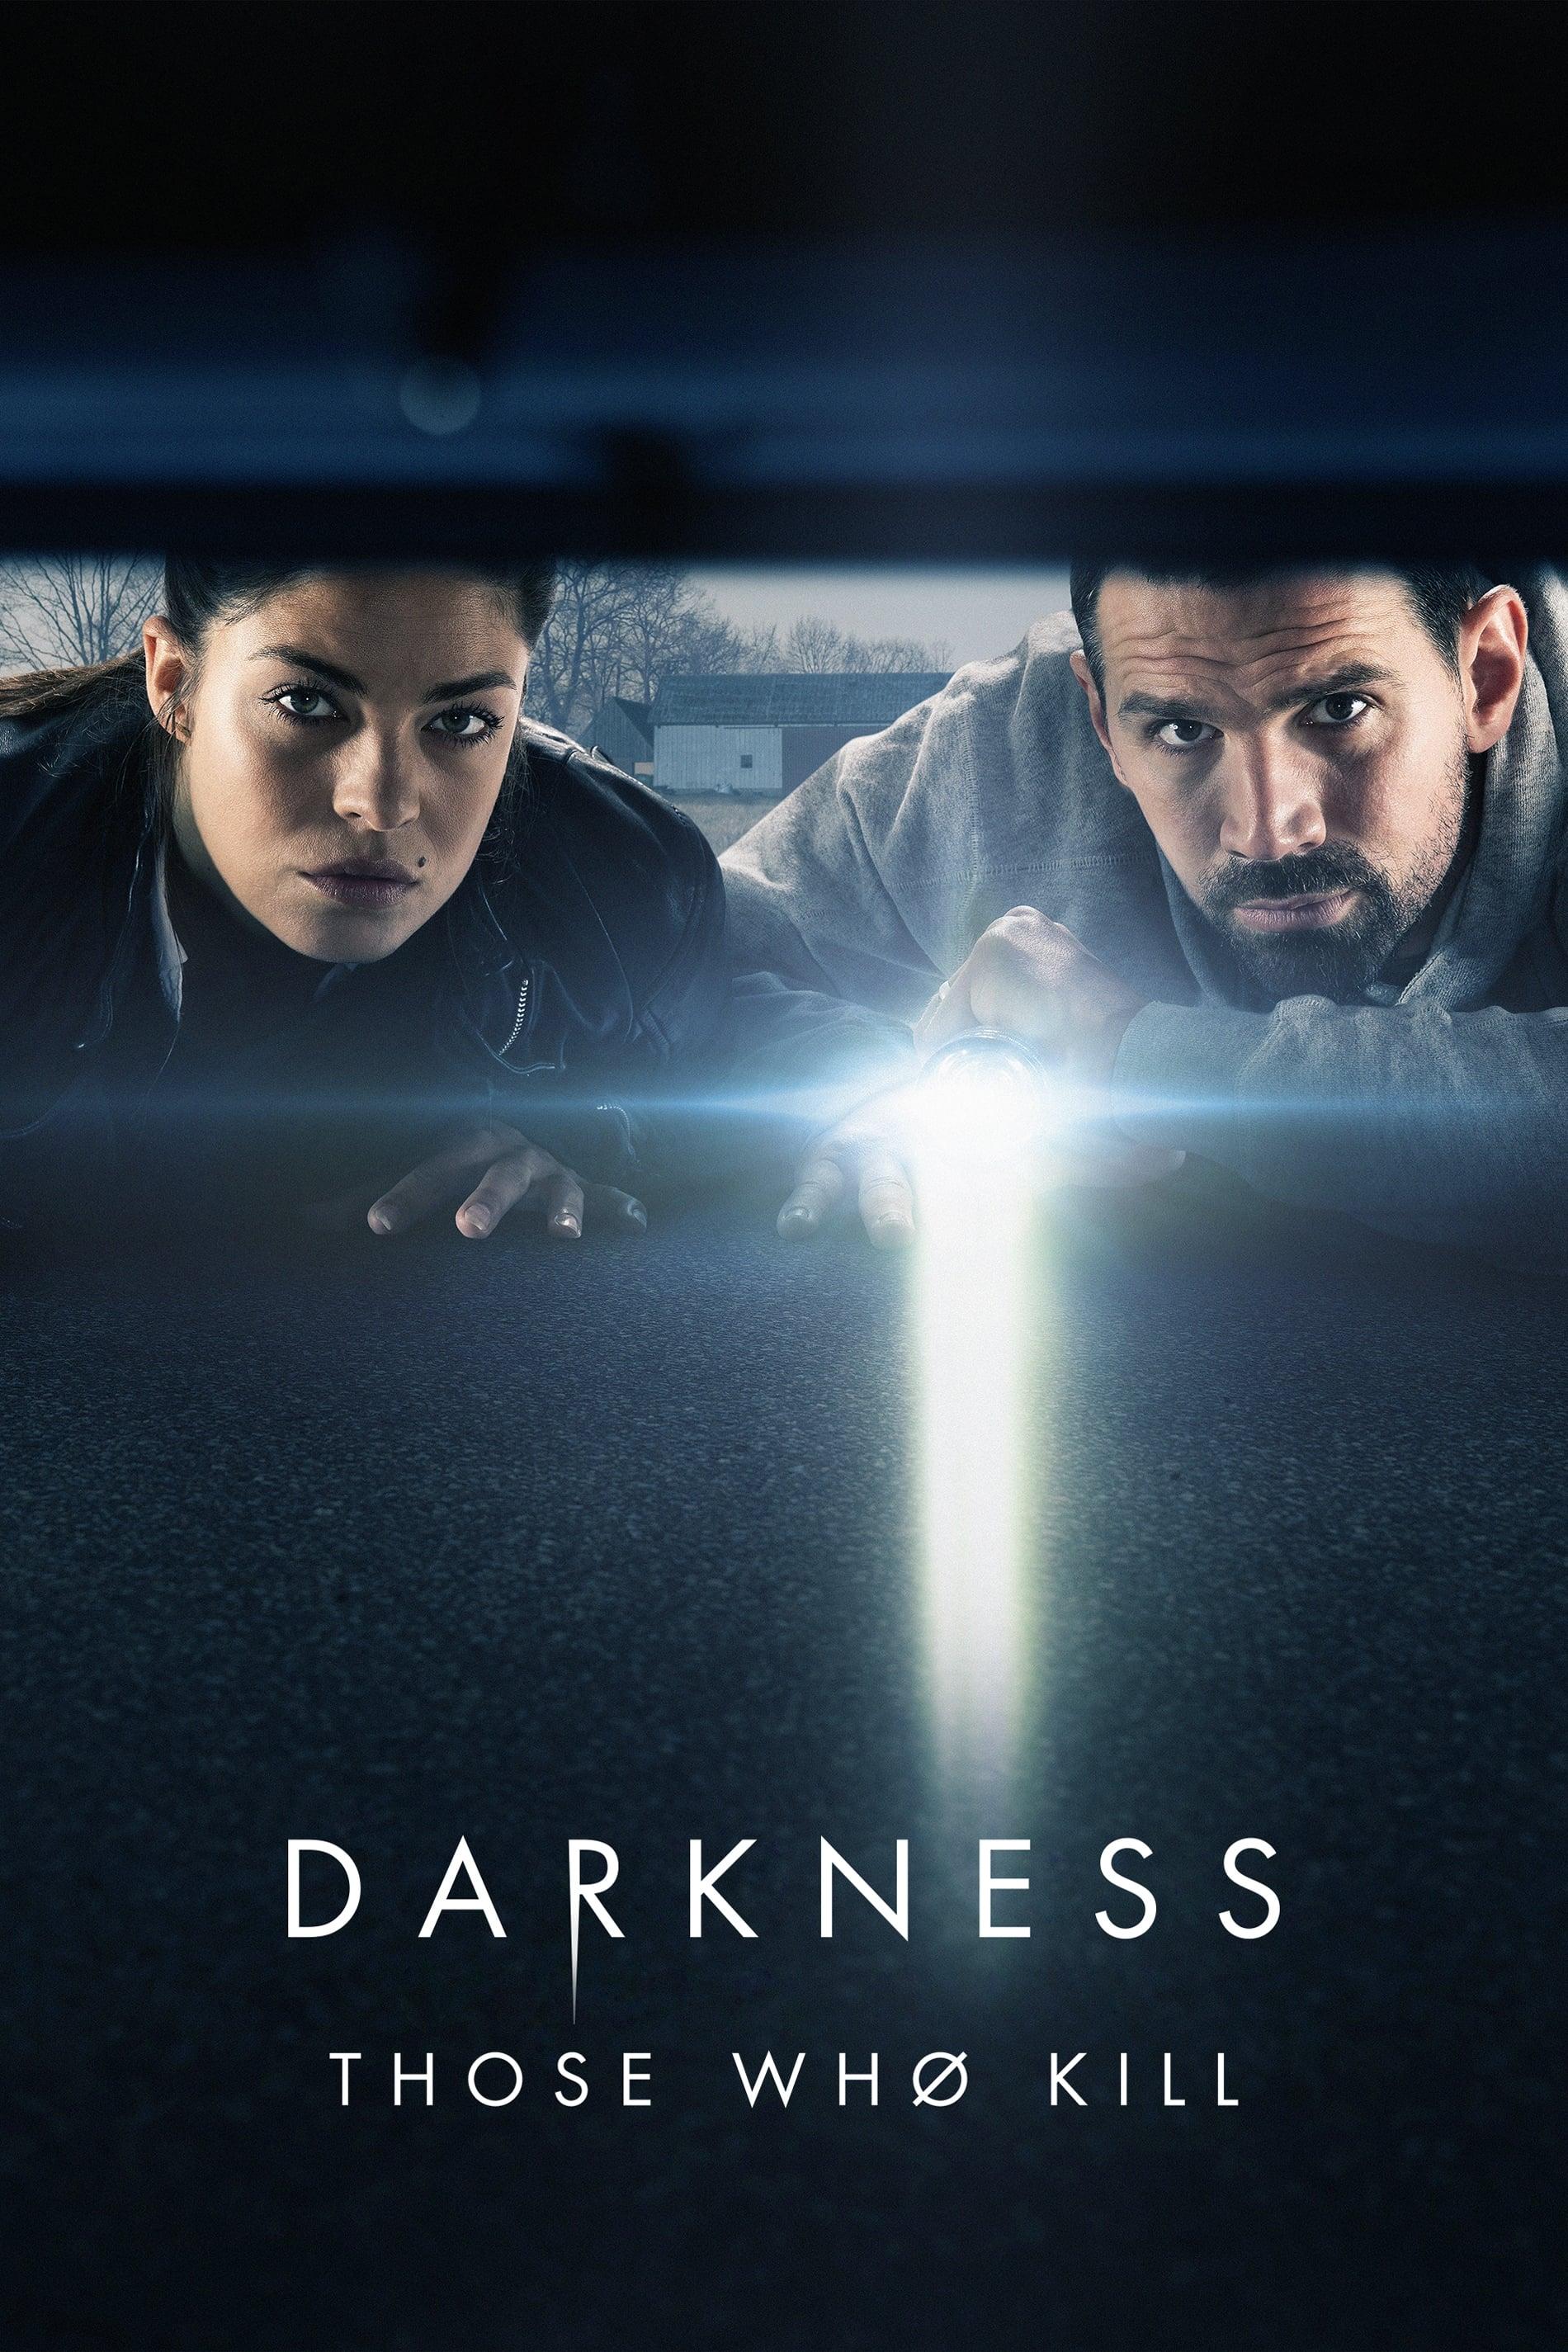 Darkness: Those Who Kill poster